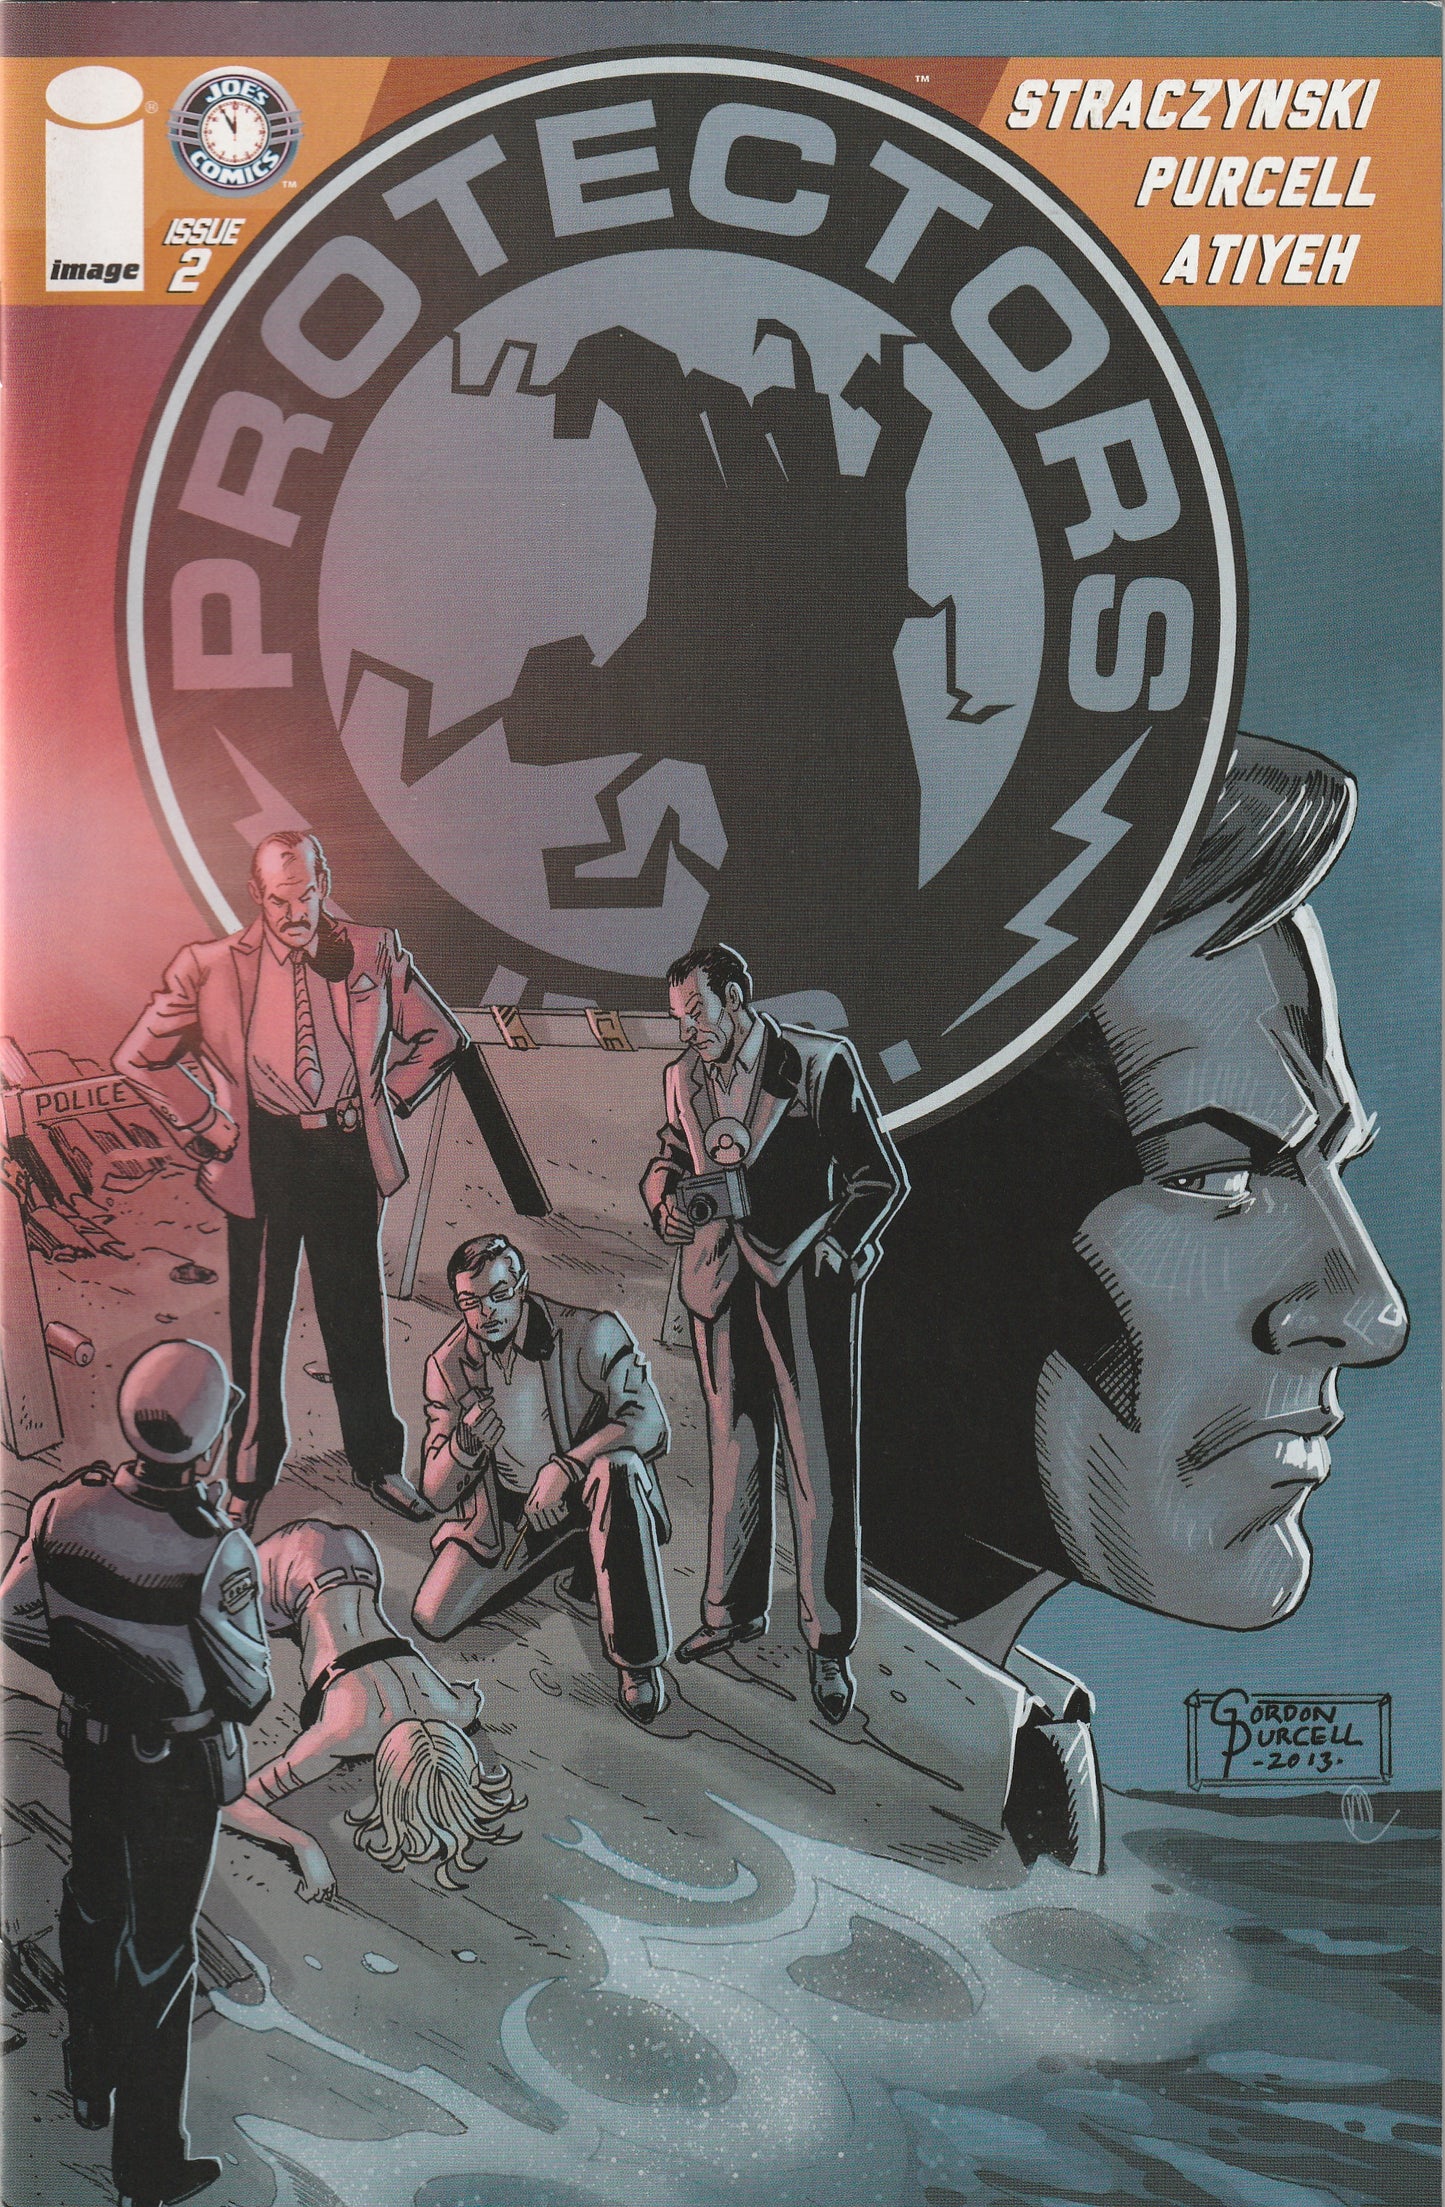 Protectors Inc #2 (2013) - Cover A by Gordon Purcell & Mike Atiyeh